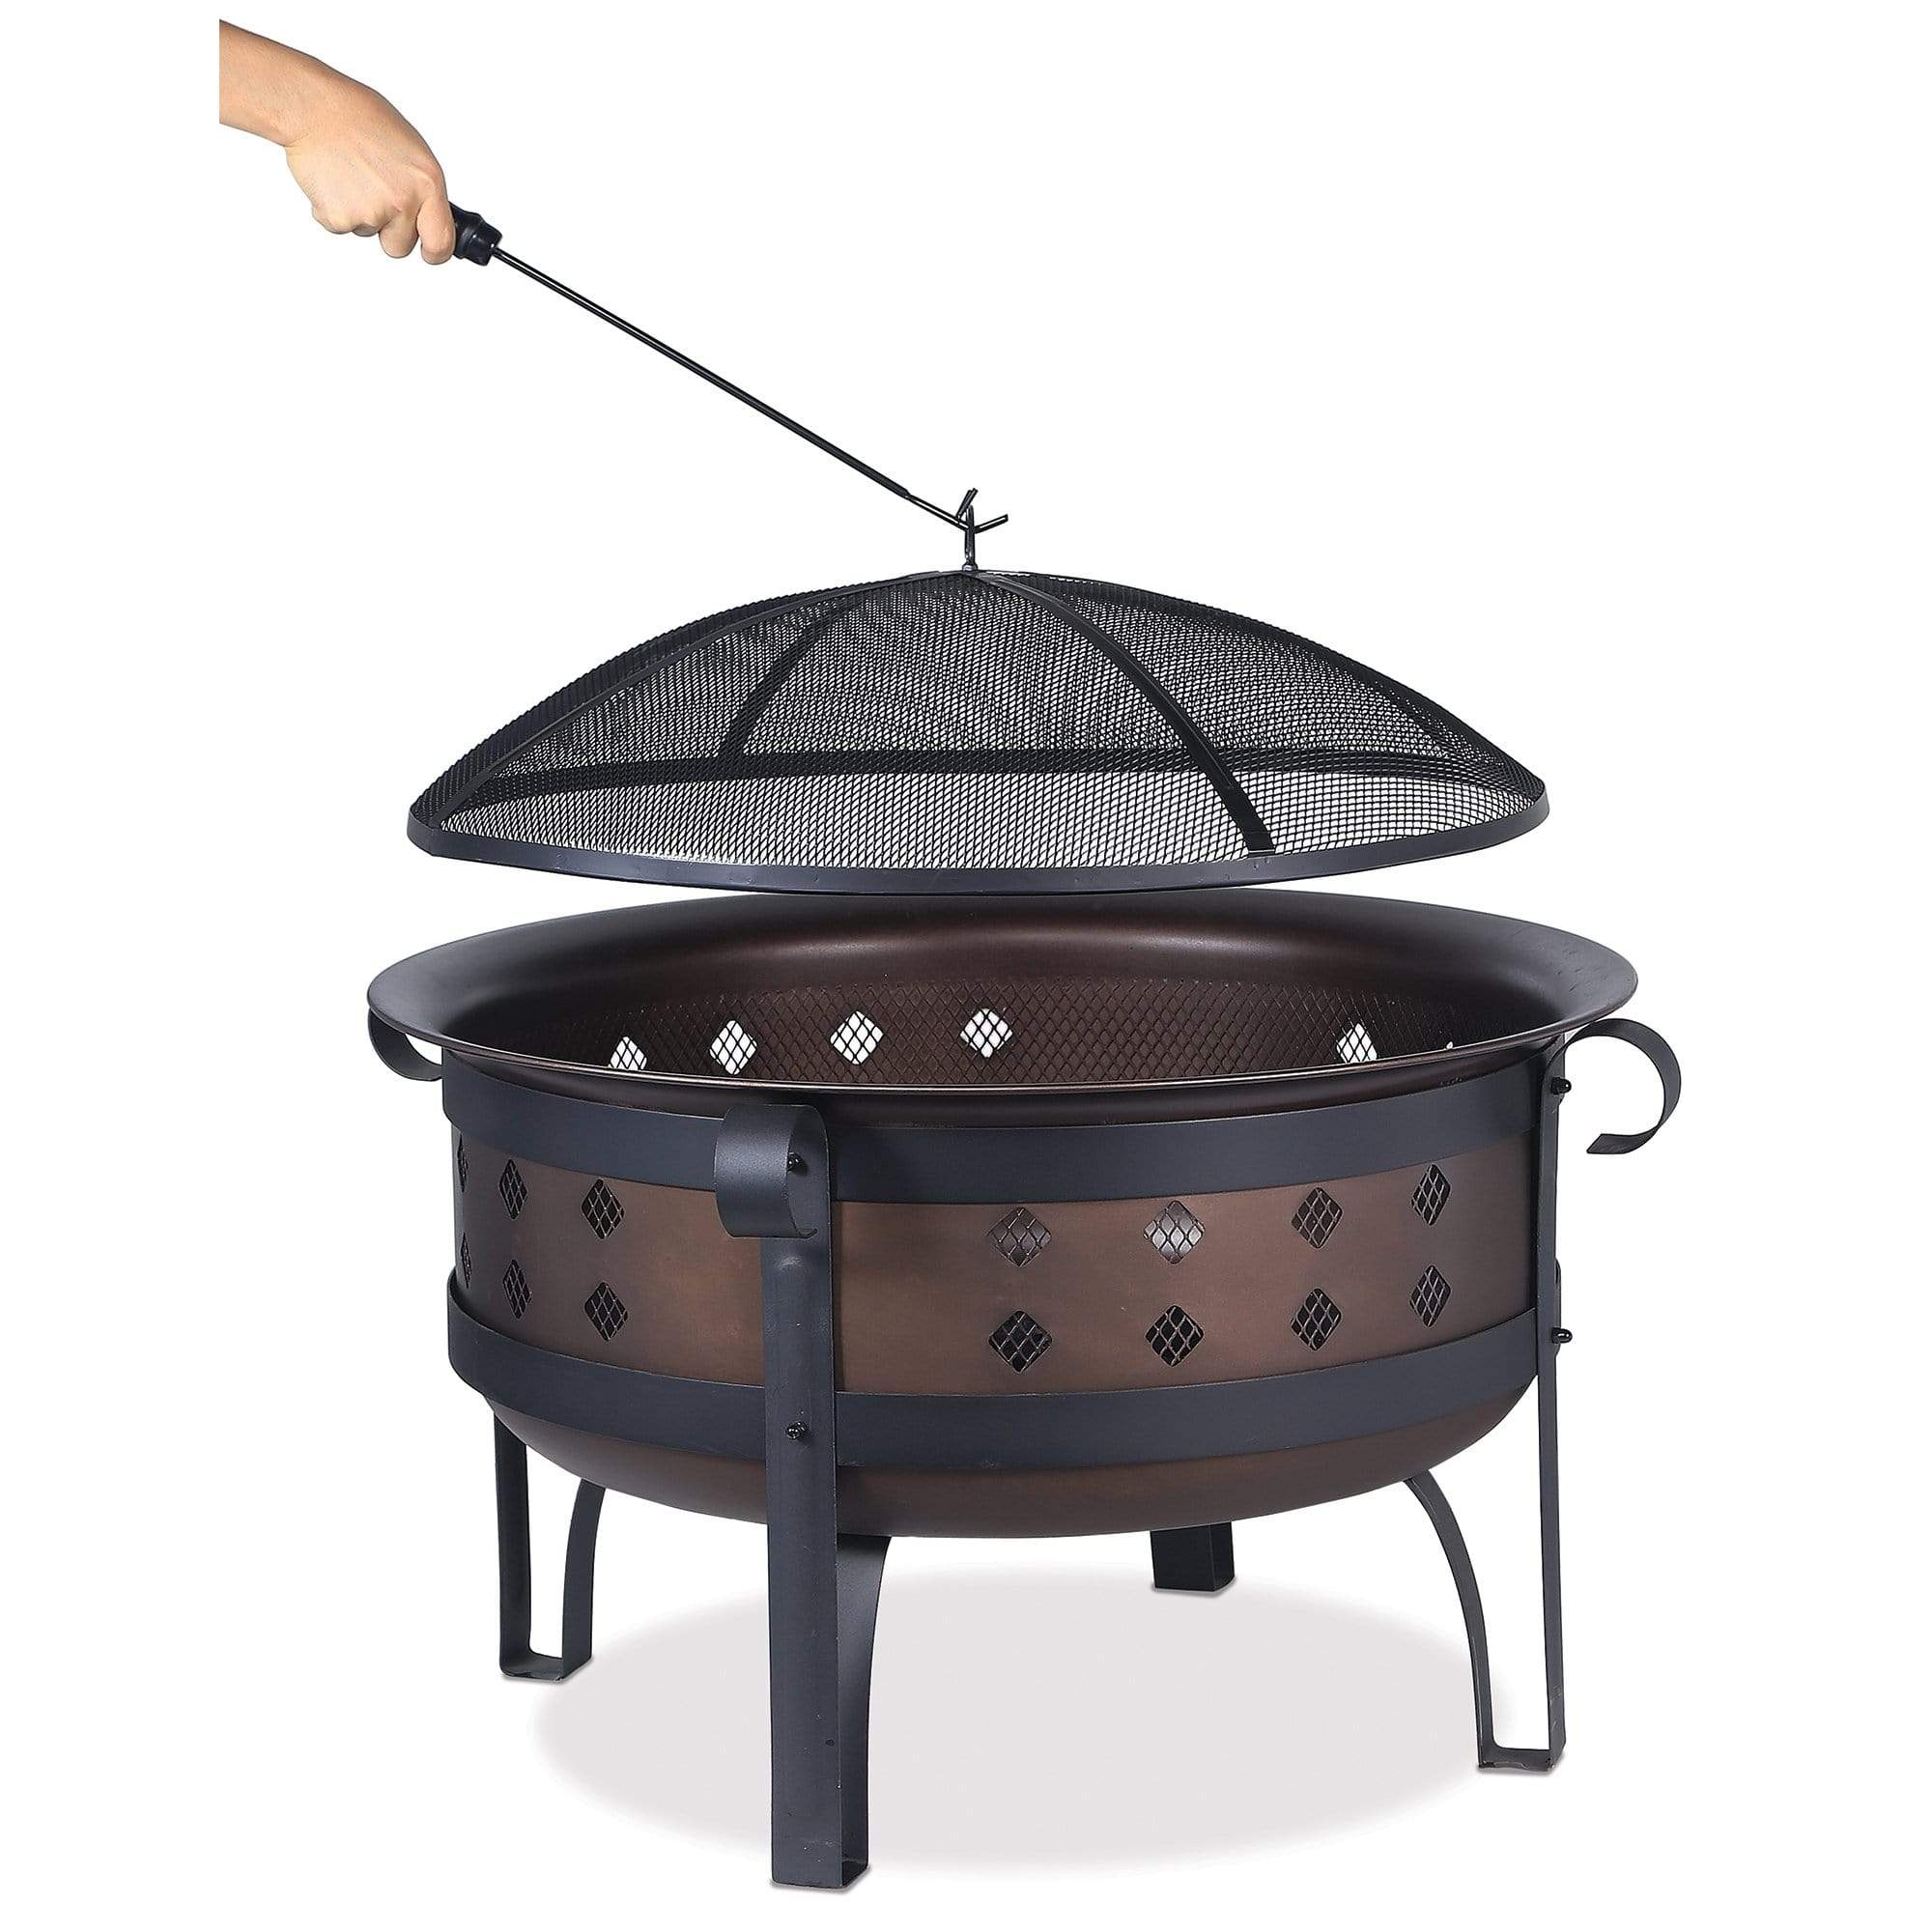 Endless Summer Fire Pit 34 IN STEEL/BRUSHED COPPER WOOD BURNING OUTDOOR FIREBOWL